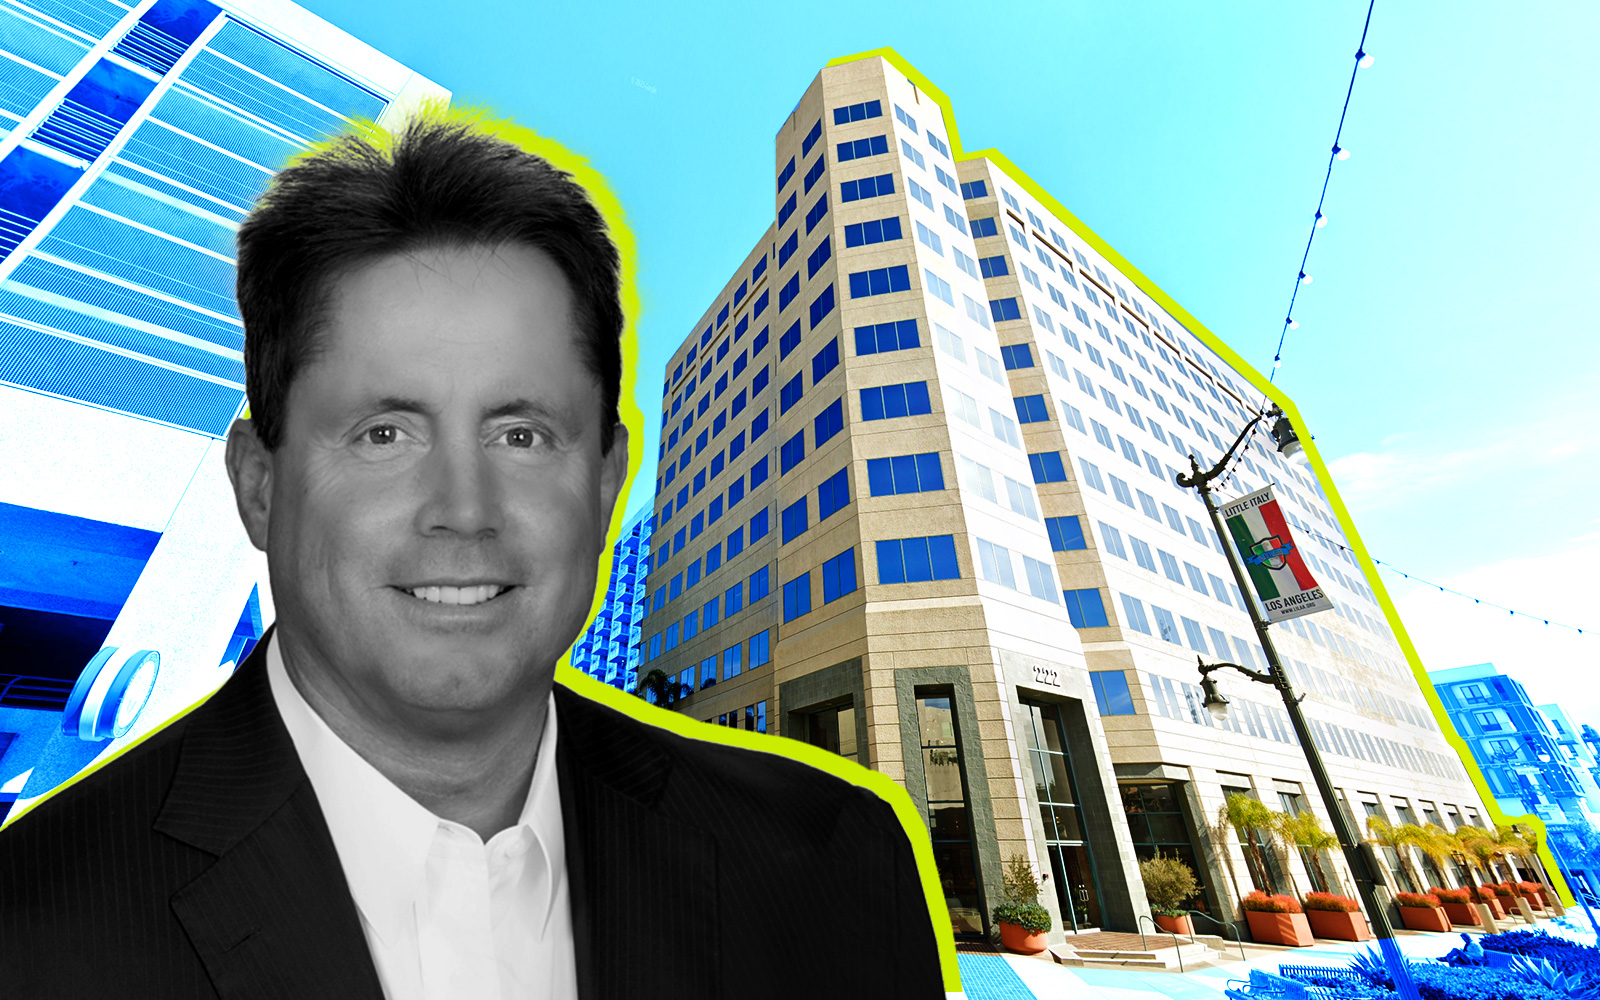 The Topaz Tower Apartments at 222 W. 6th St. in San Pedro with Newmark's Kevin Shannon